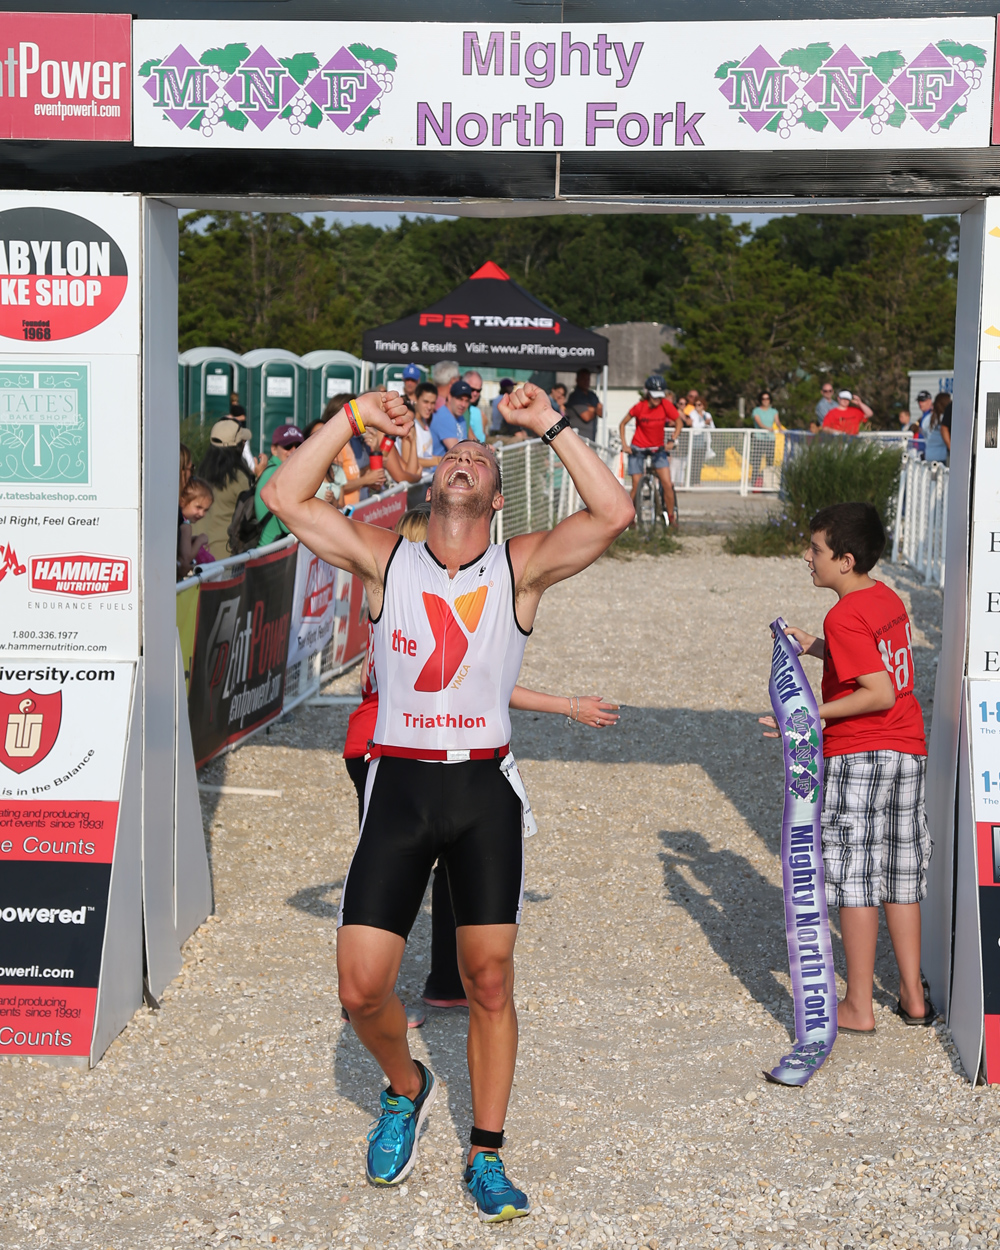 Tim Steiskal of Brookhaven was the winner of the Mighty North Fork Triathlon with a time of 46:36. The event was held at Cedar Beach in Southold Sunday. (Credit: Daniel De Mato)